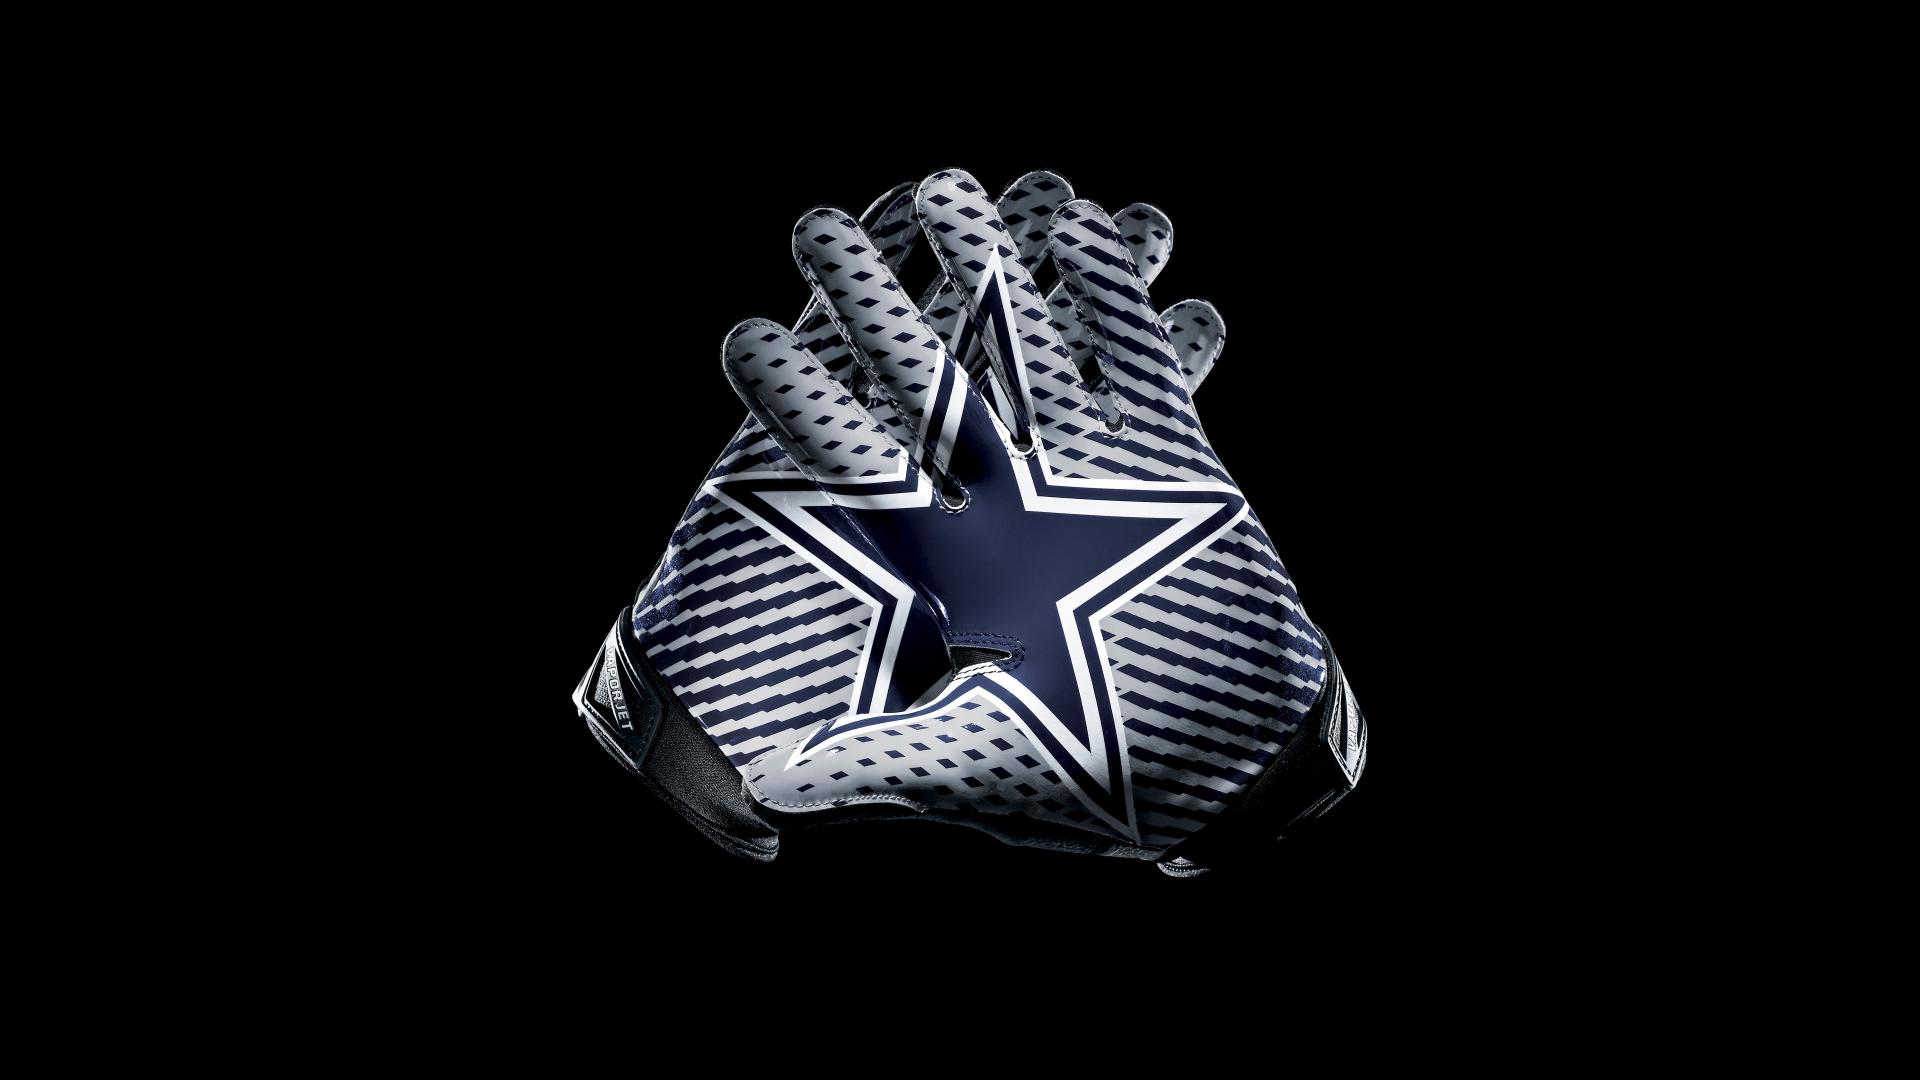 Dallas Cowboys Gloves Wallpaper HD Wallpapers for 1920x1080